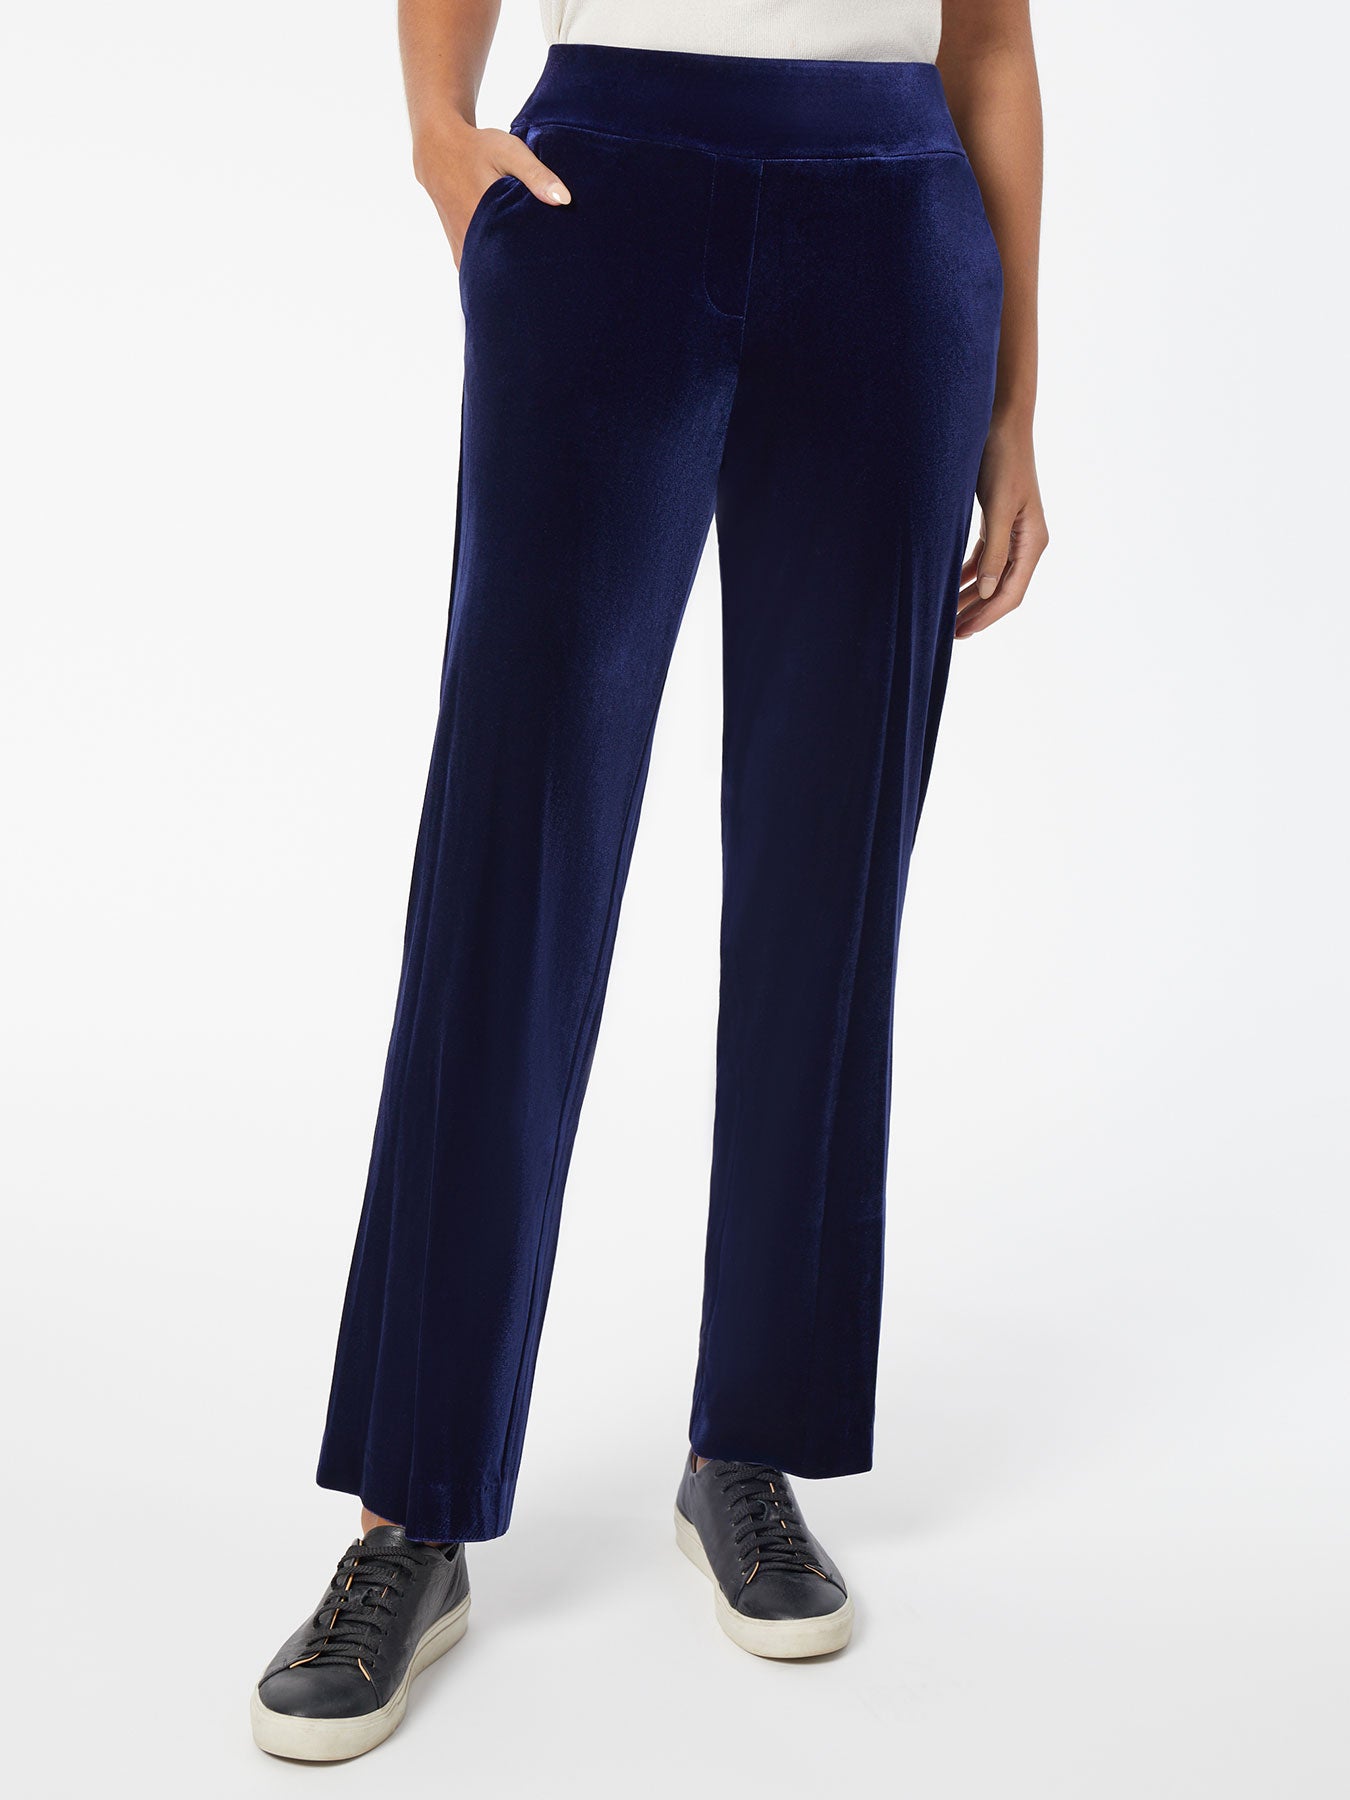 Jyeity Lots Of Styles And Prints, Solid Color Pants Straight Wide